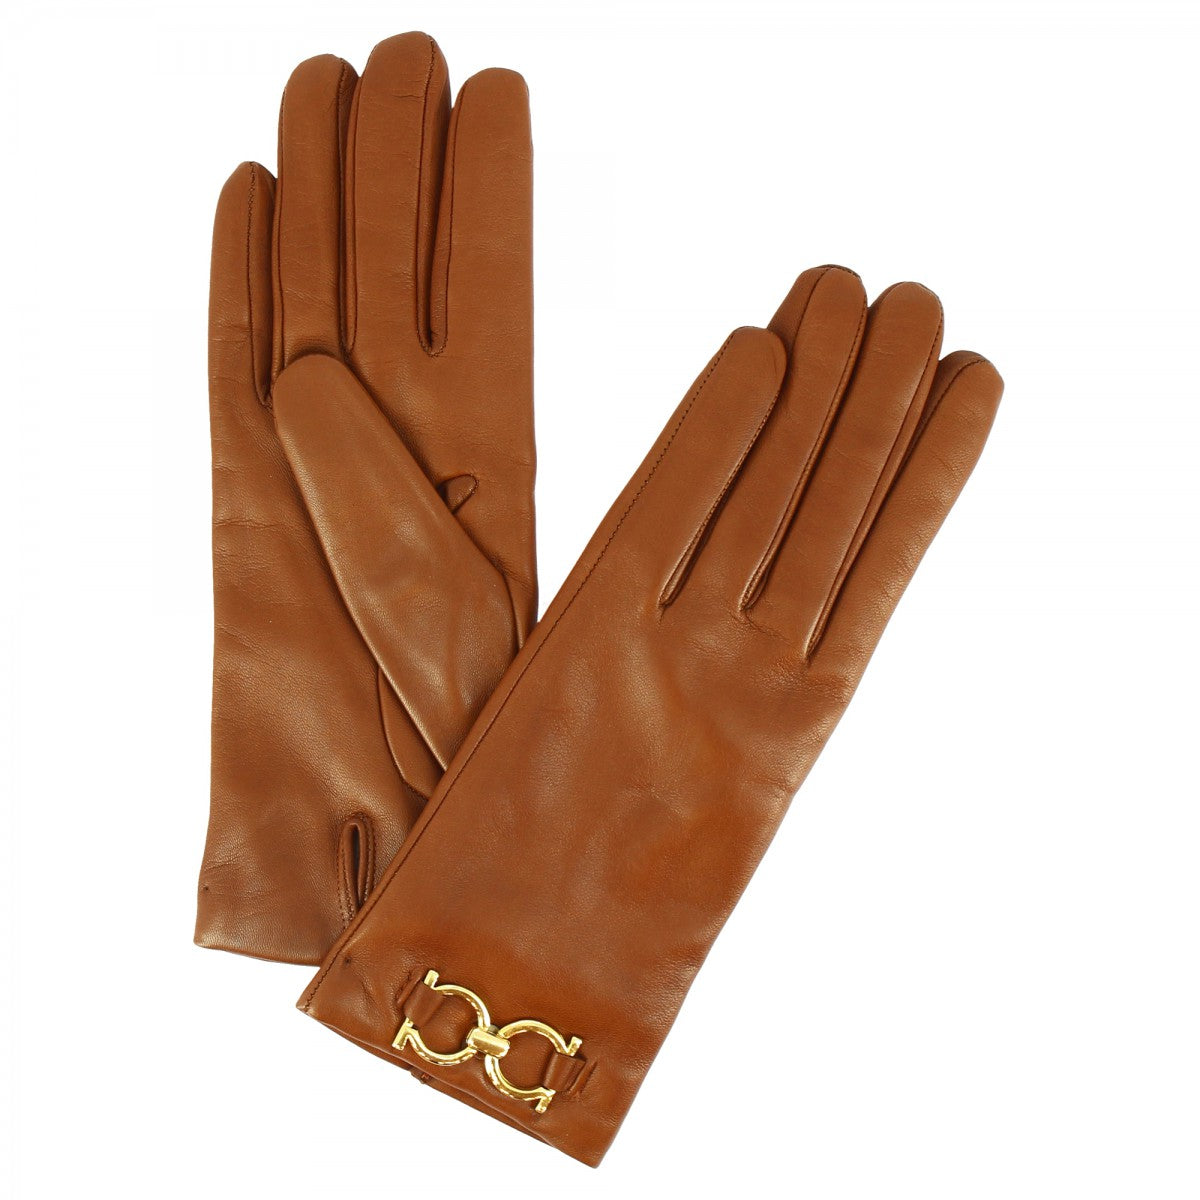 Italian handcrafted leather gloves for women